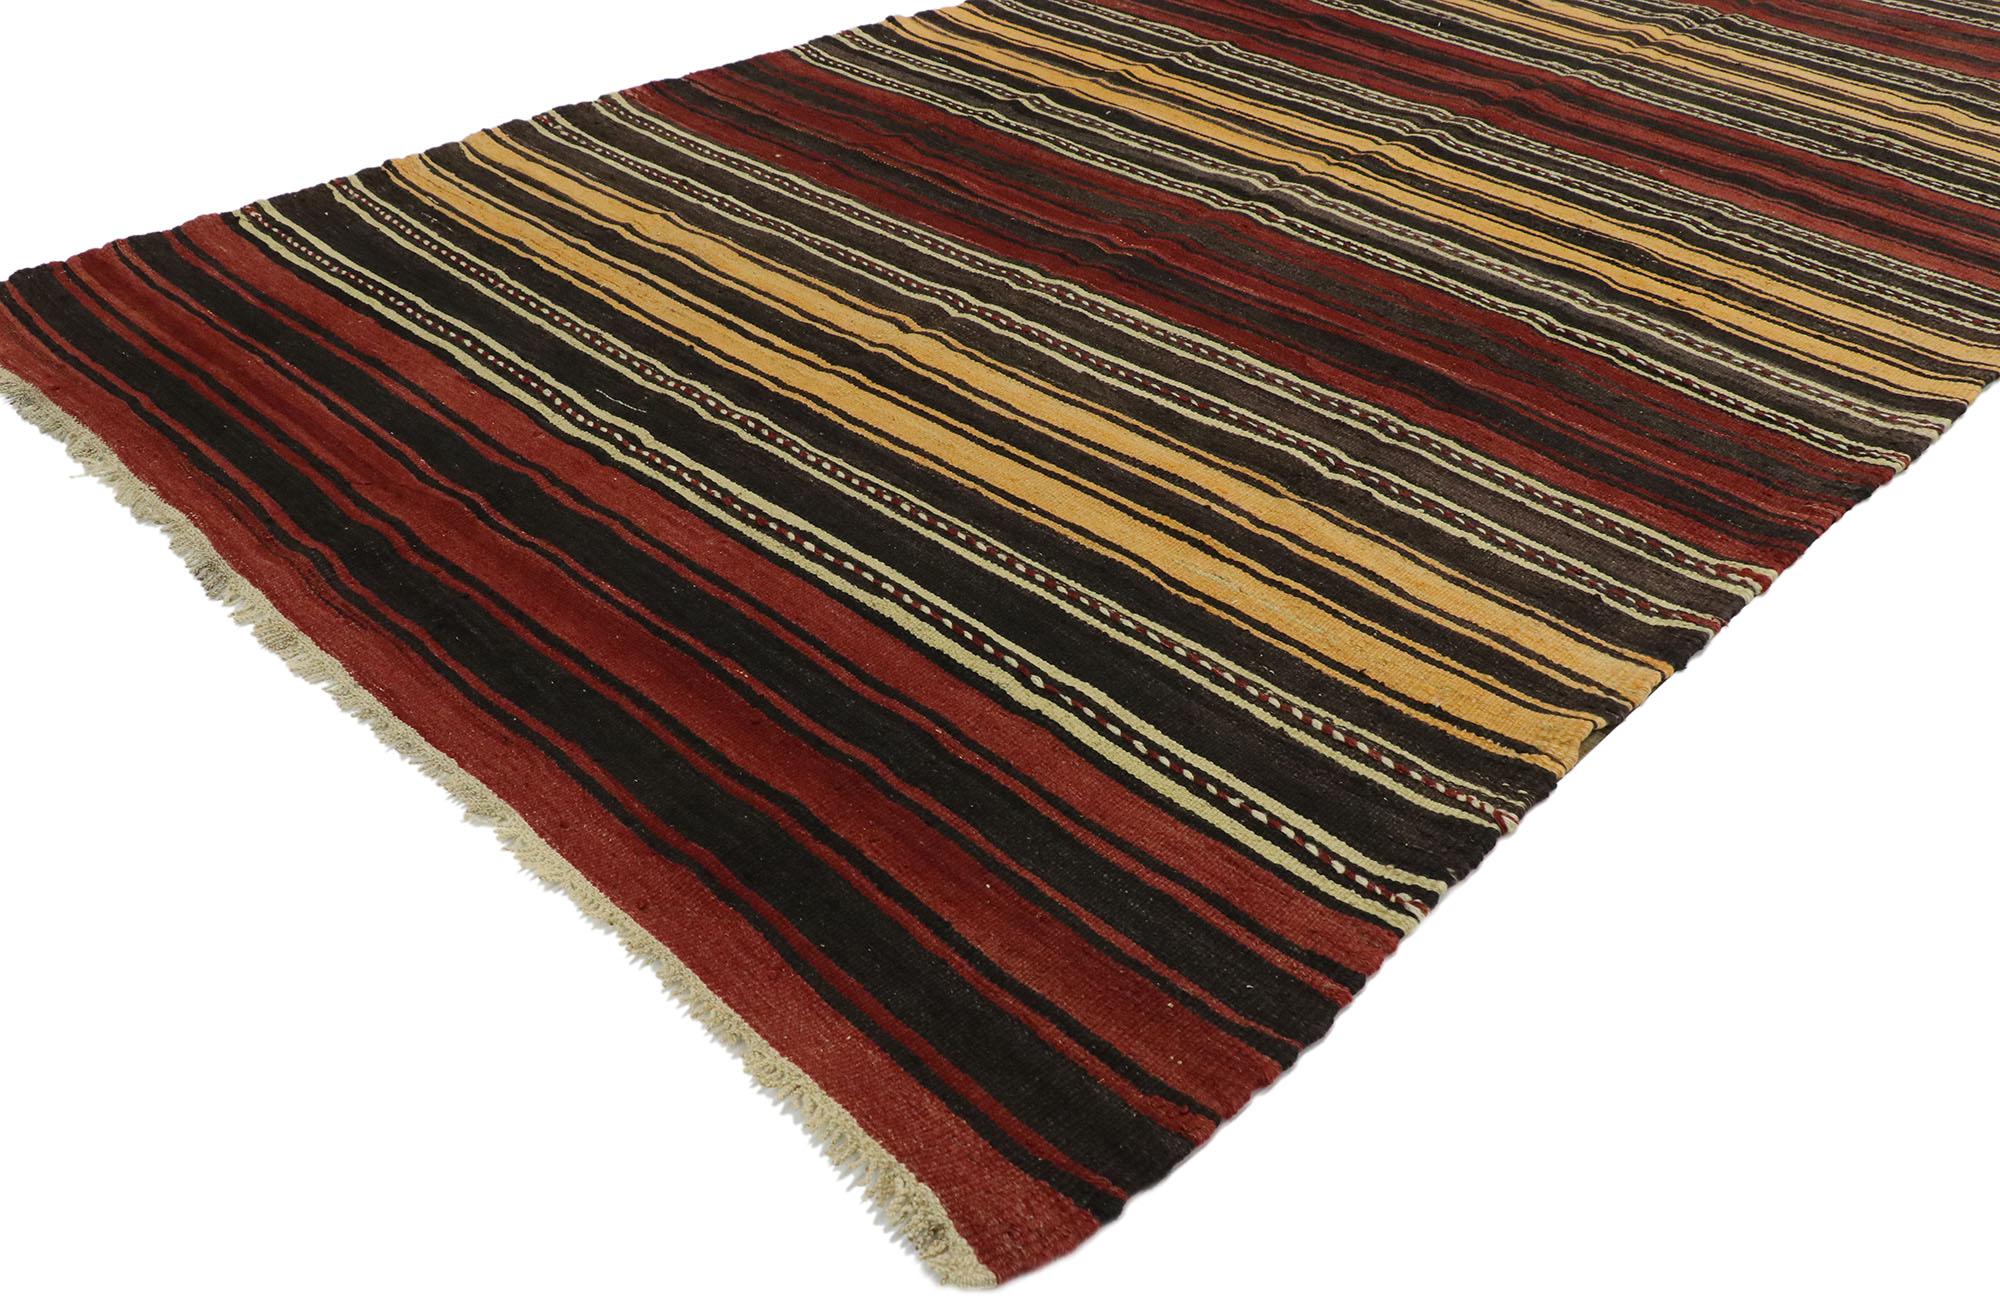 53131, vintage Turkish striped kilim rug with modern cabin style. With its warm hues and rugged beauty, this handwoven wool striped kilim rug manages to meld contemporary, modern, and traditional design elements. The flat-weave kilim rug features a